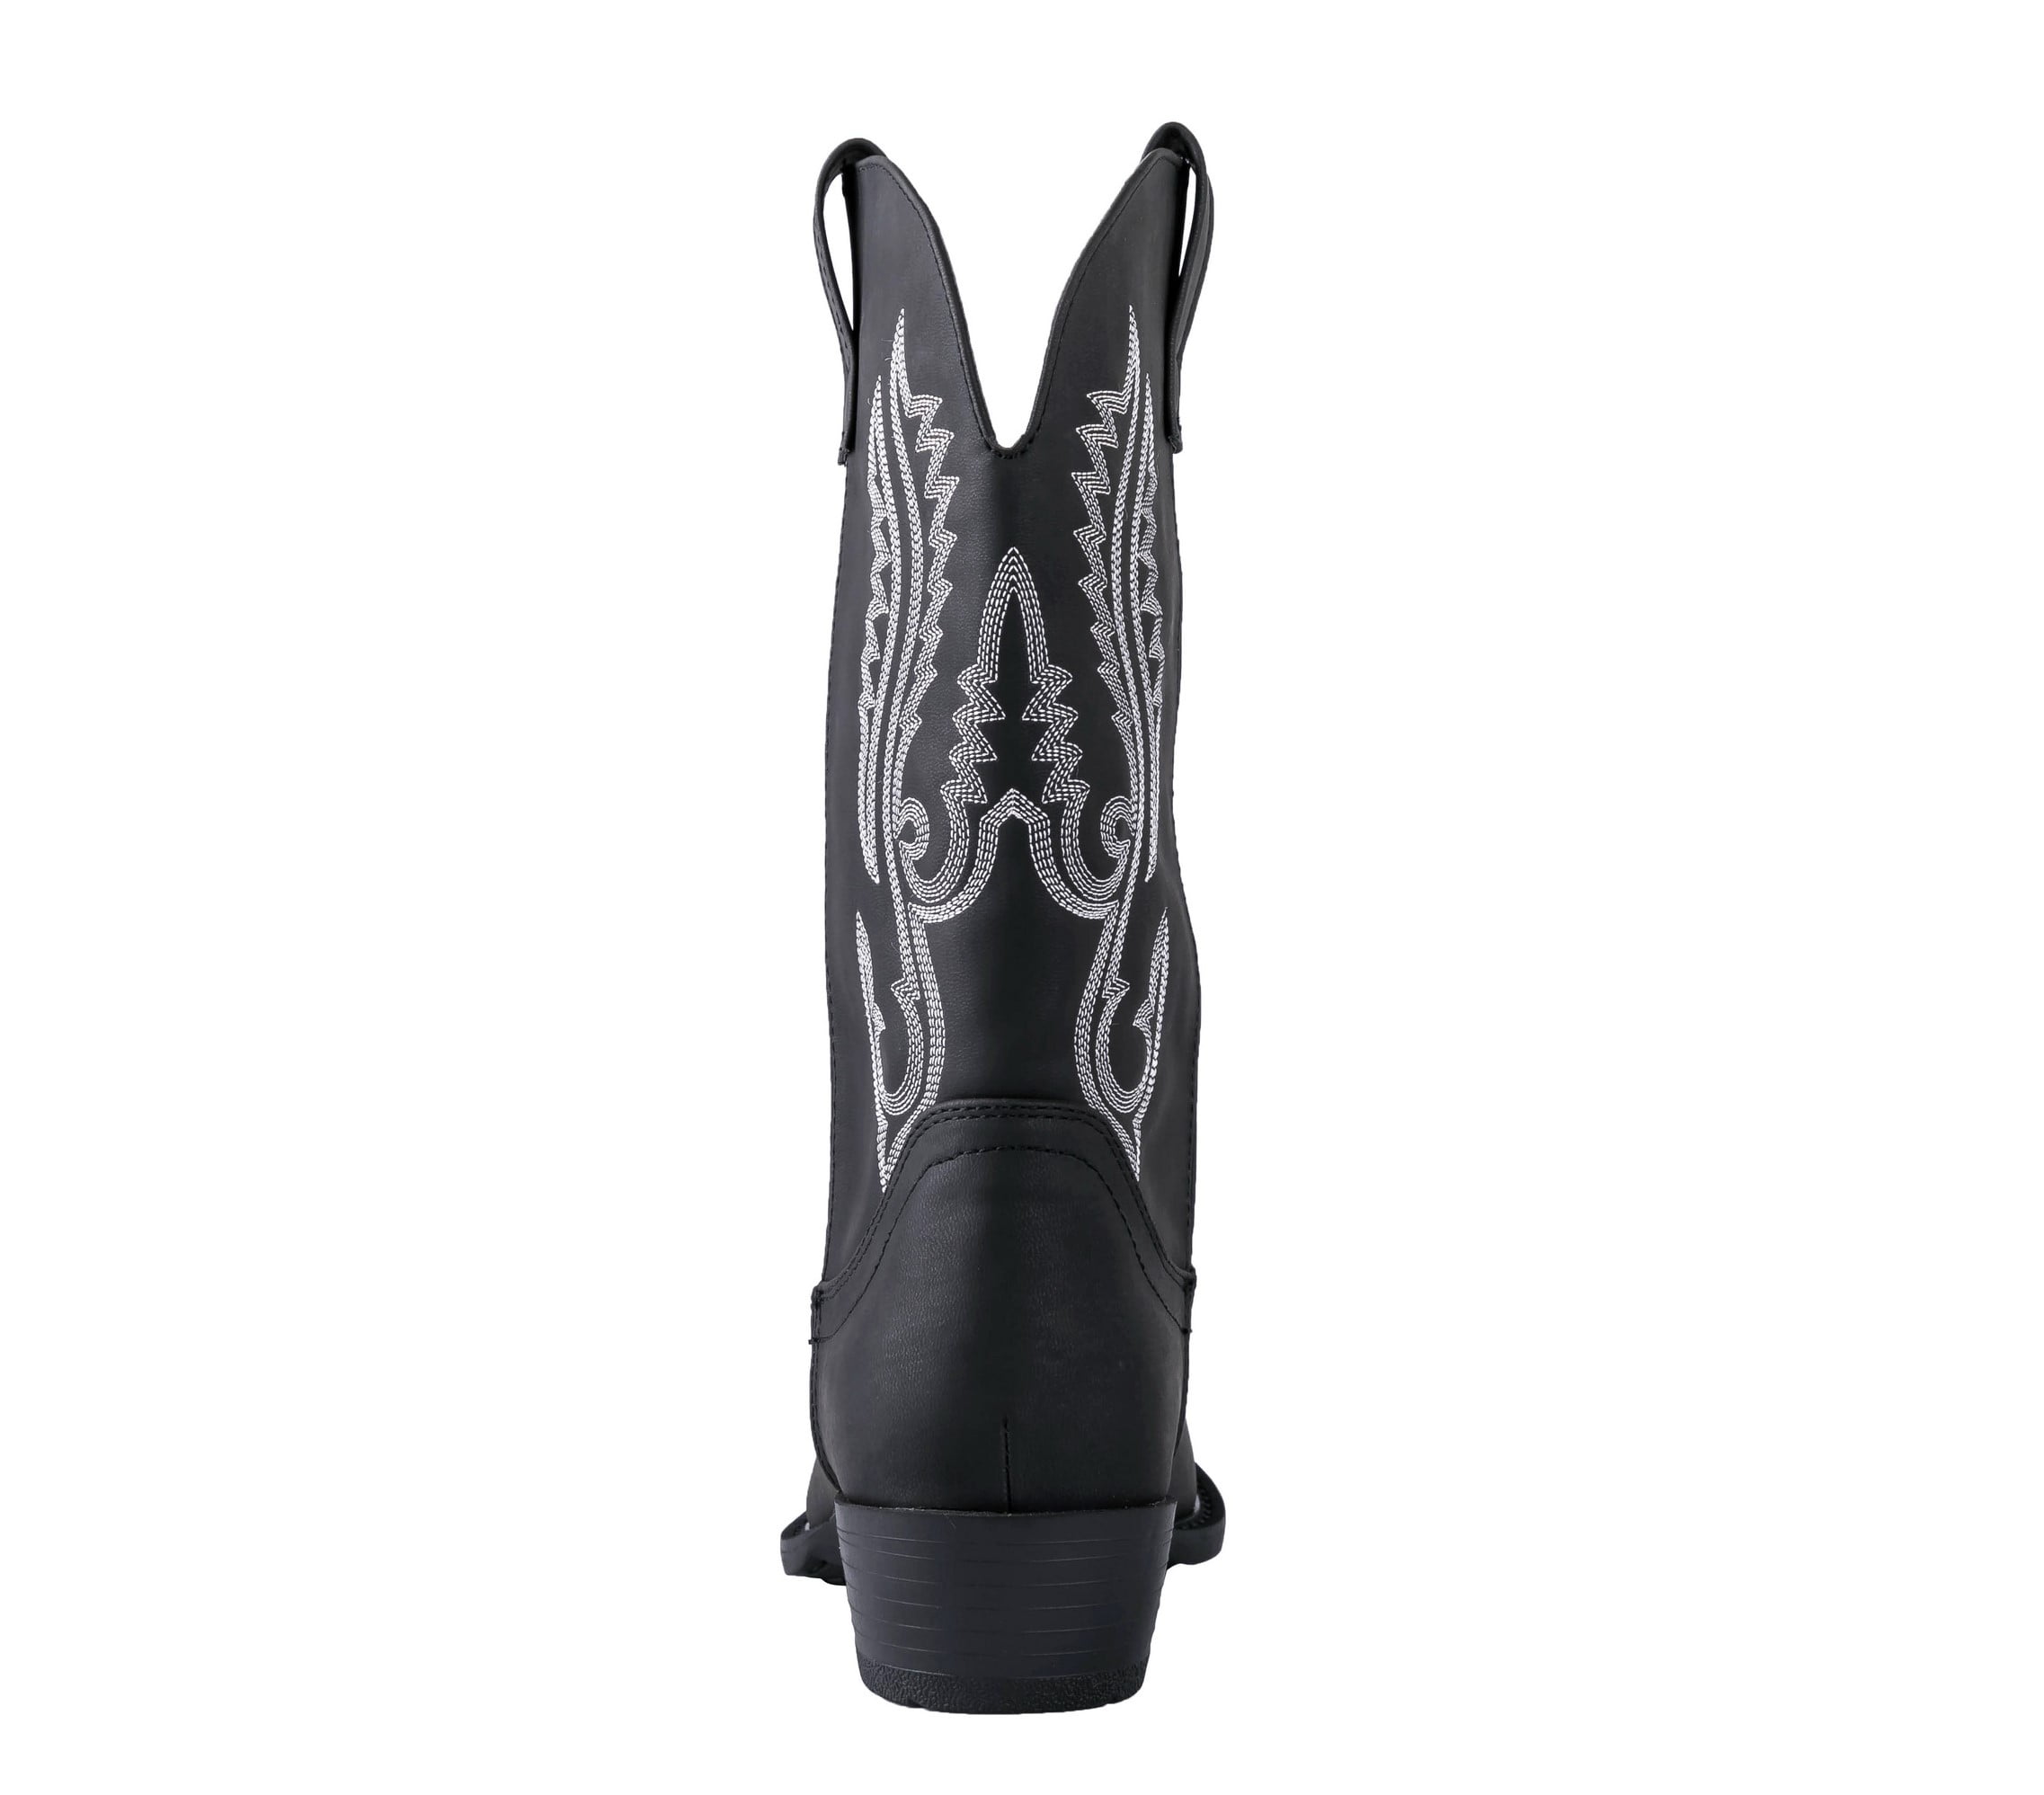 Canyon Trails Mens Classic Durable Round Toe Embroidered Western Rodeo Cowboy Boots 